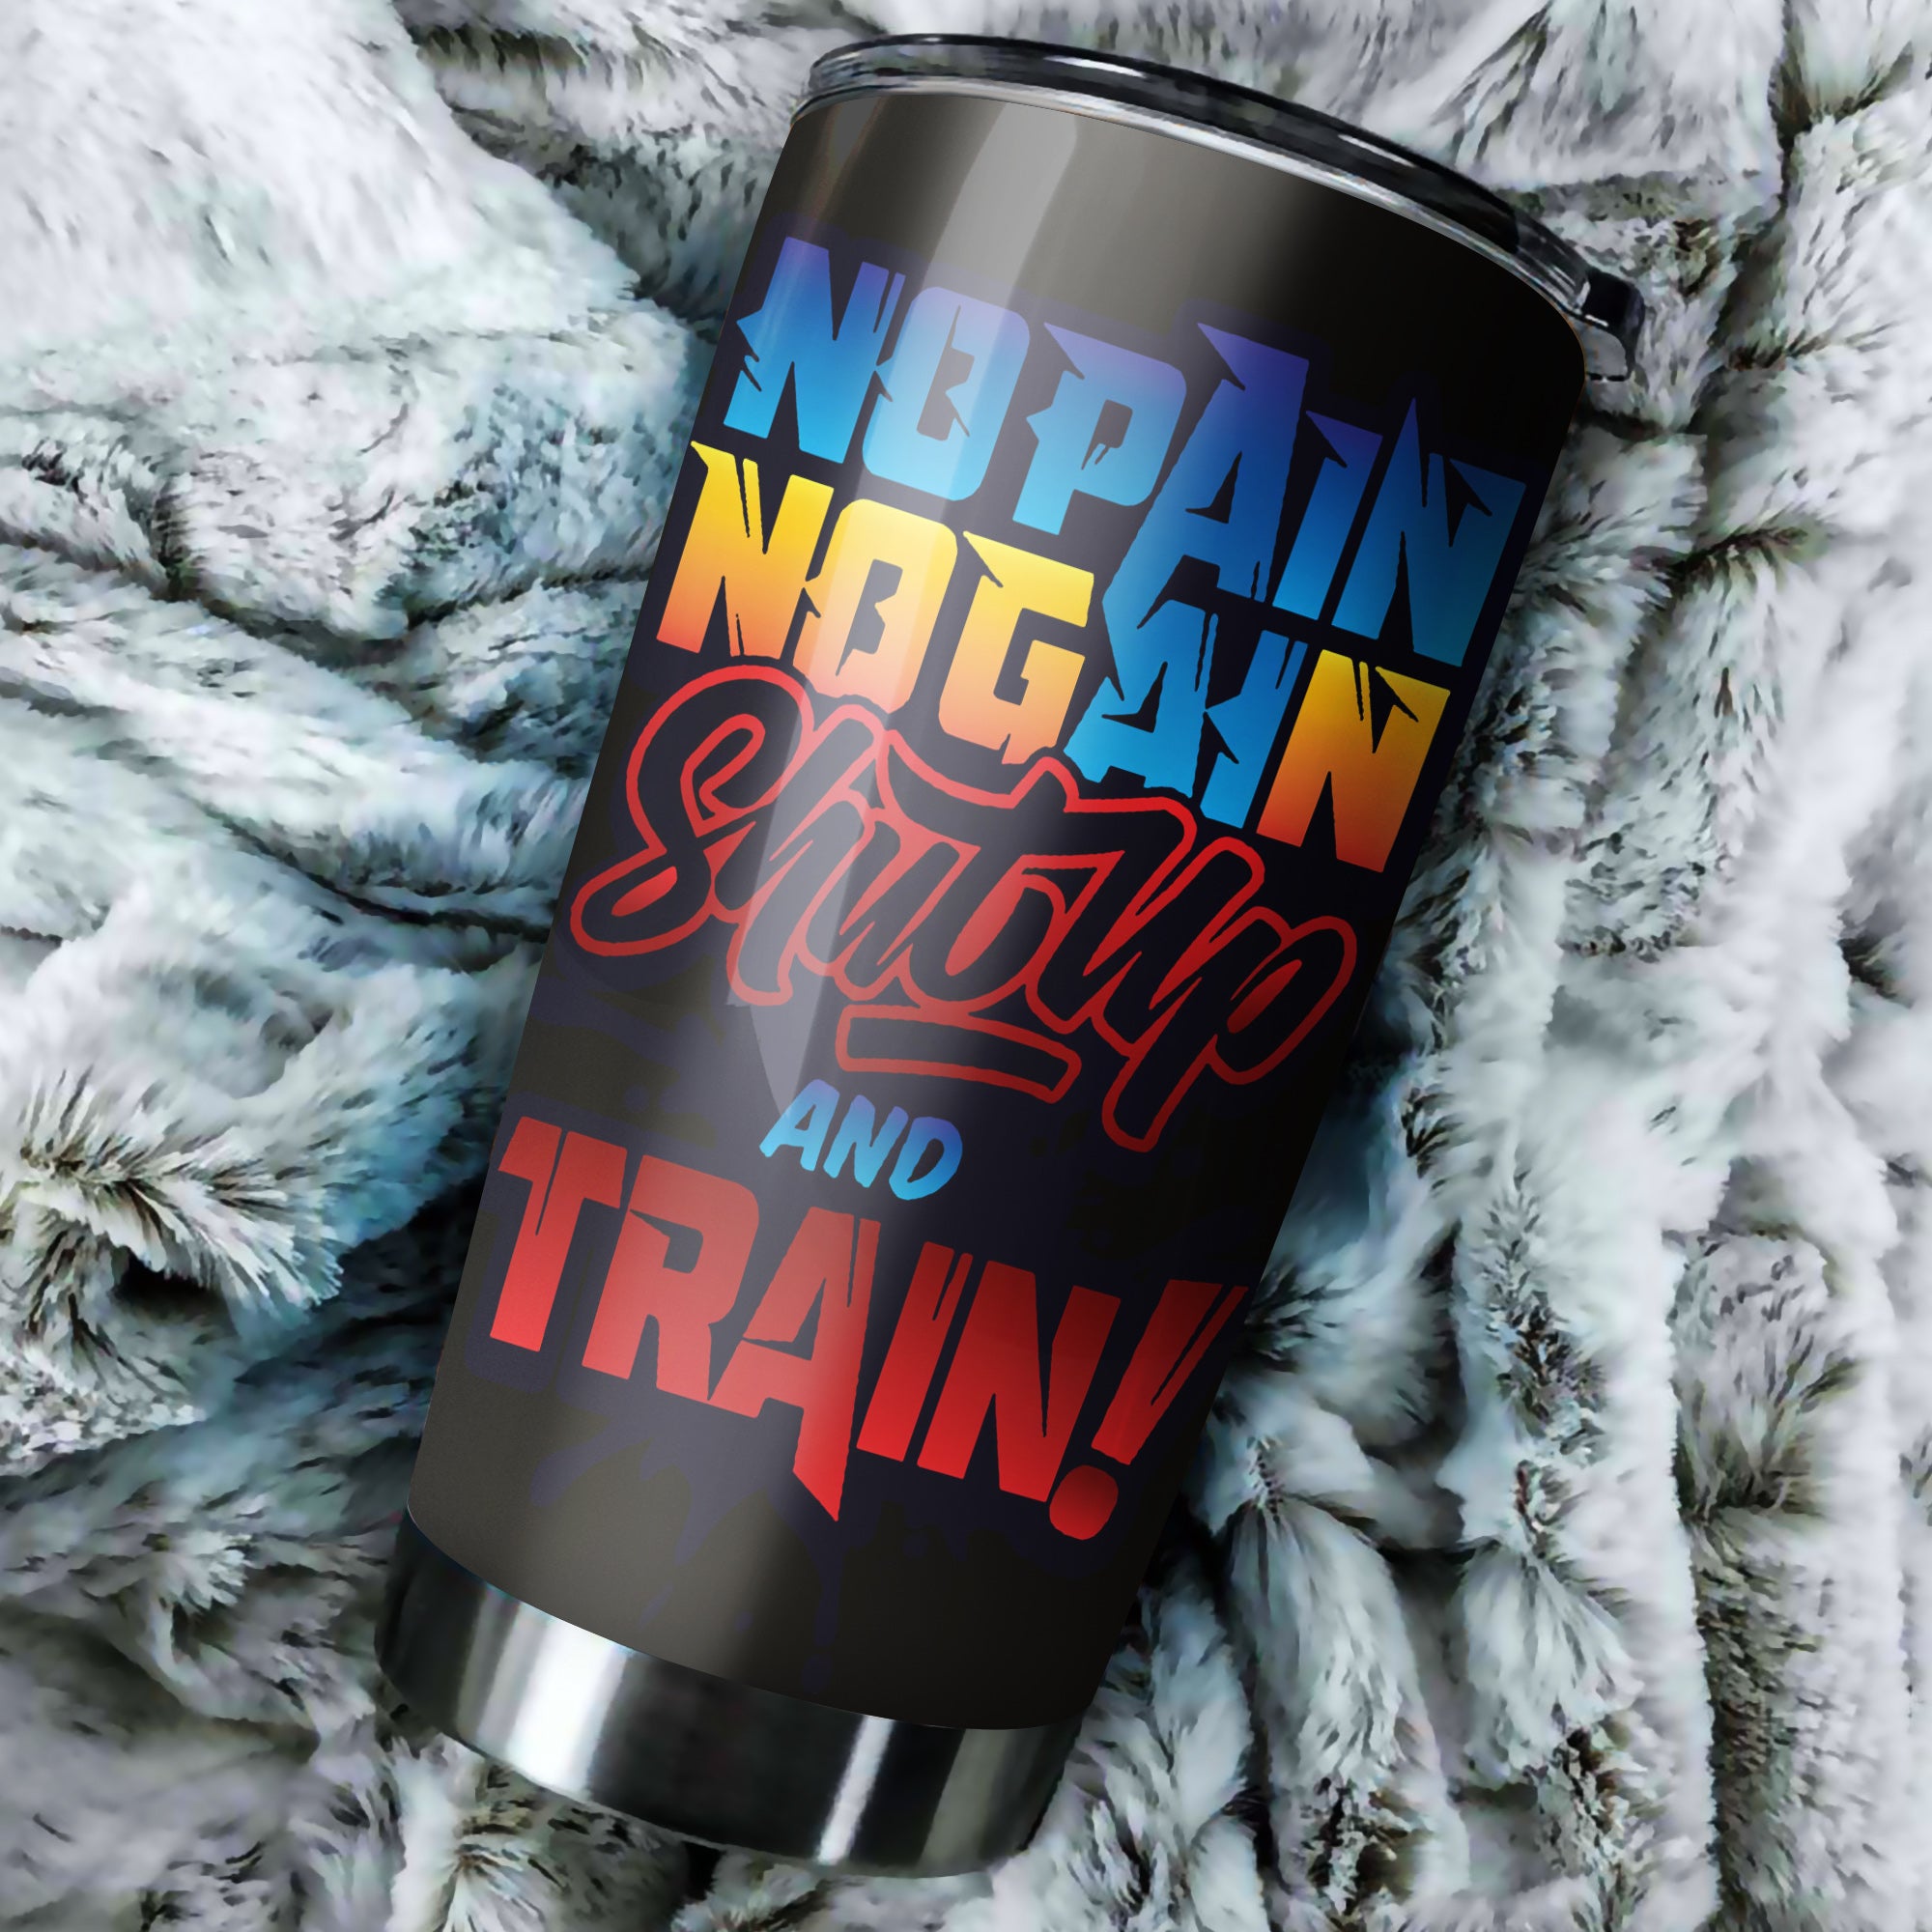 Personalized Gym Bodybuilding Tumbler Cup Motivation Quotes Workout Gifts